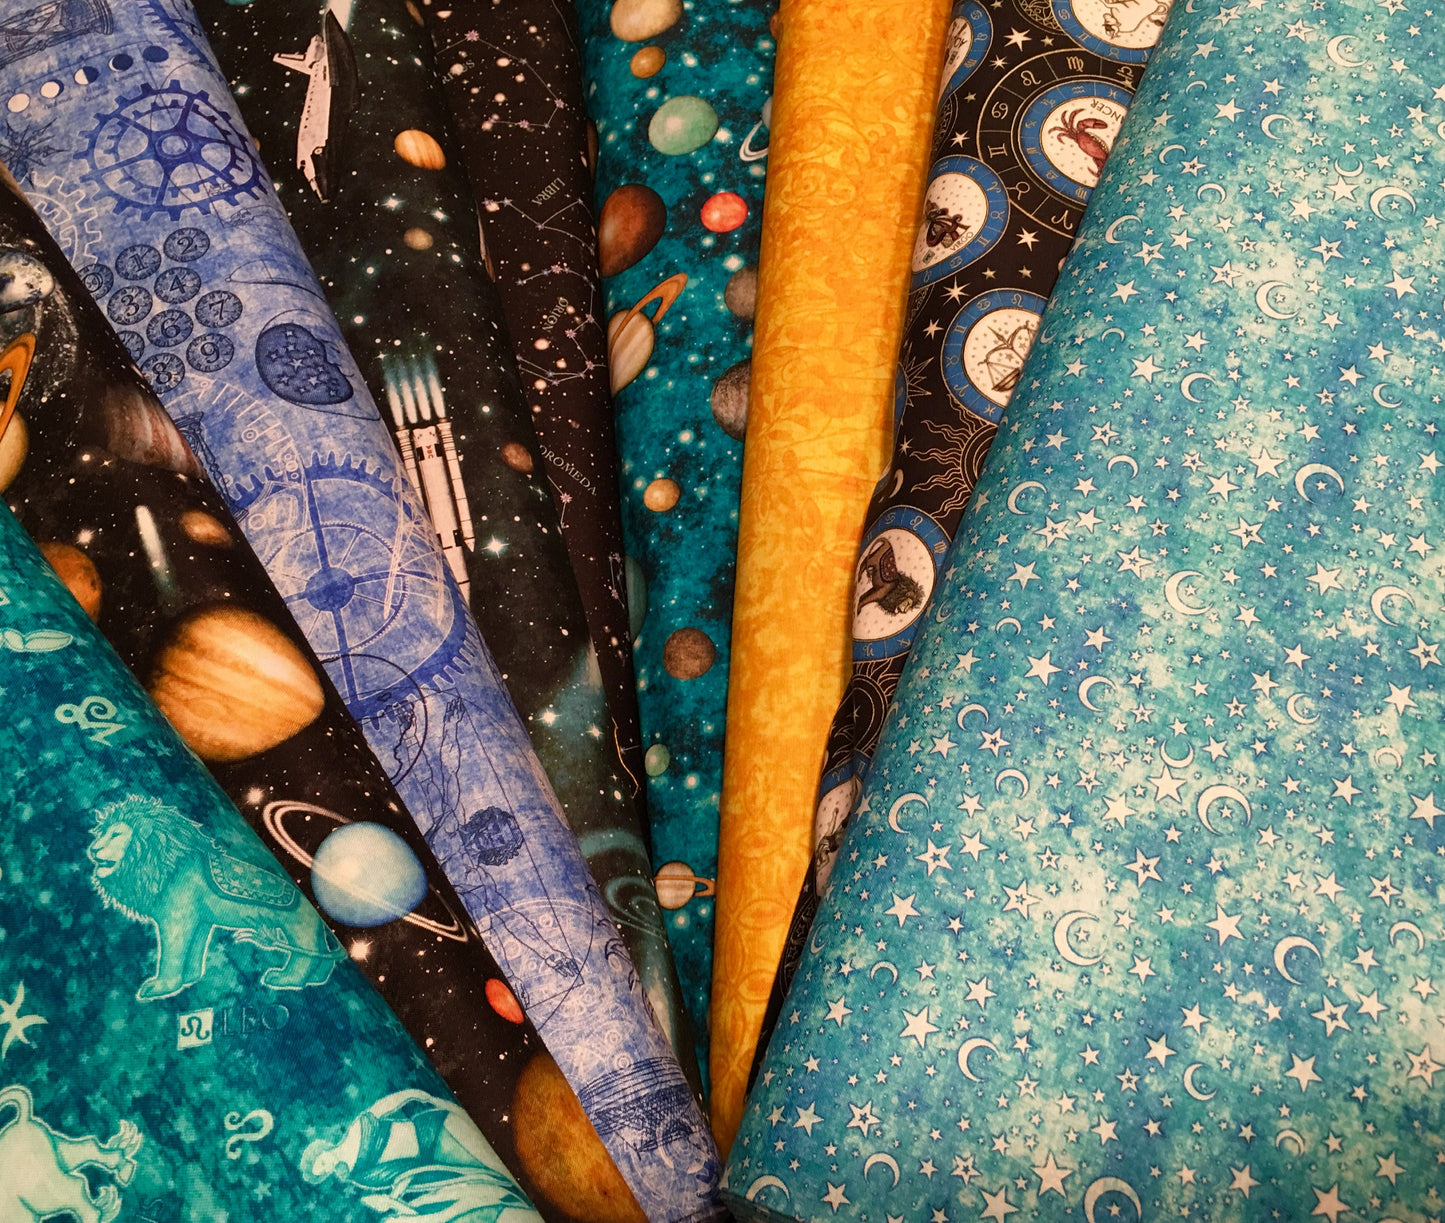 Intergalactic by Dan Morris Space Ships Midnight Cotton Woven Fabric